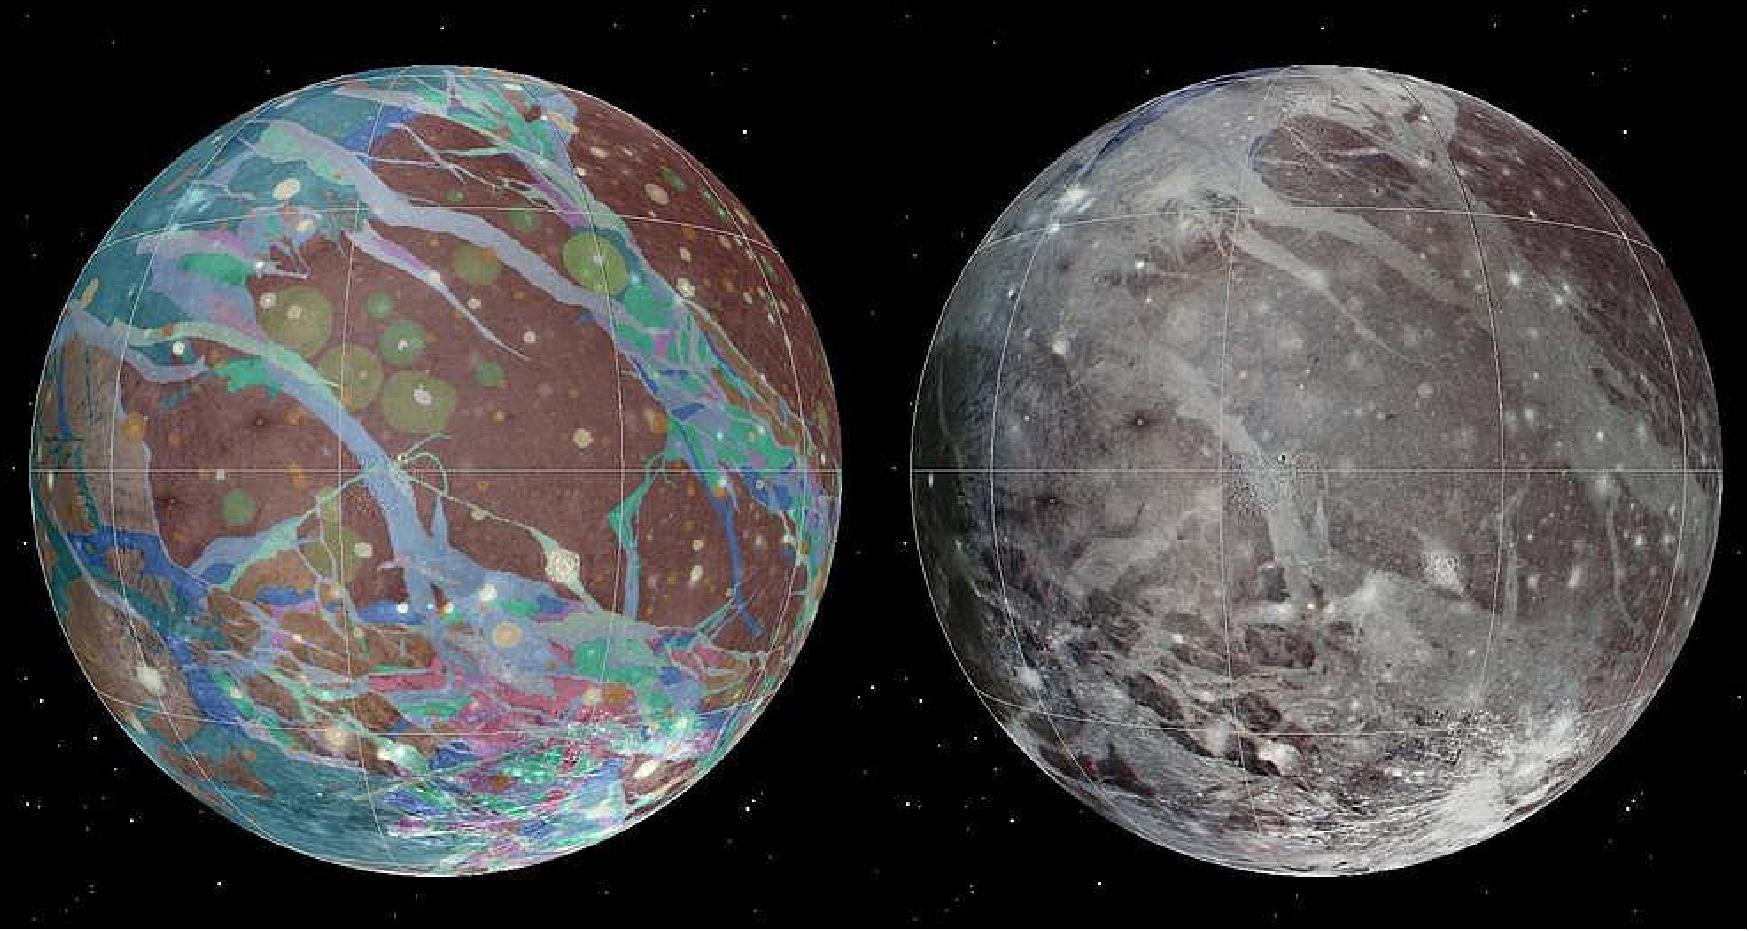 Figure 20: Left to right: The mosaic and geologic maps of Jupiter's moon Ganymede were assembled incorporating the best available imagery from NASA's Voyager 1 and 2 spacecraft and NASA's Galileo spacecraft (image credits: USGS Astrogeology Science Center/Wheaton/NASA/JPL-Caltech)